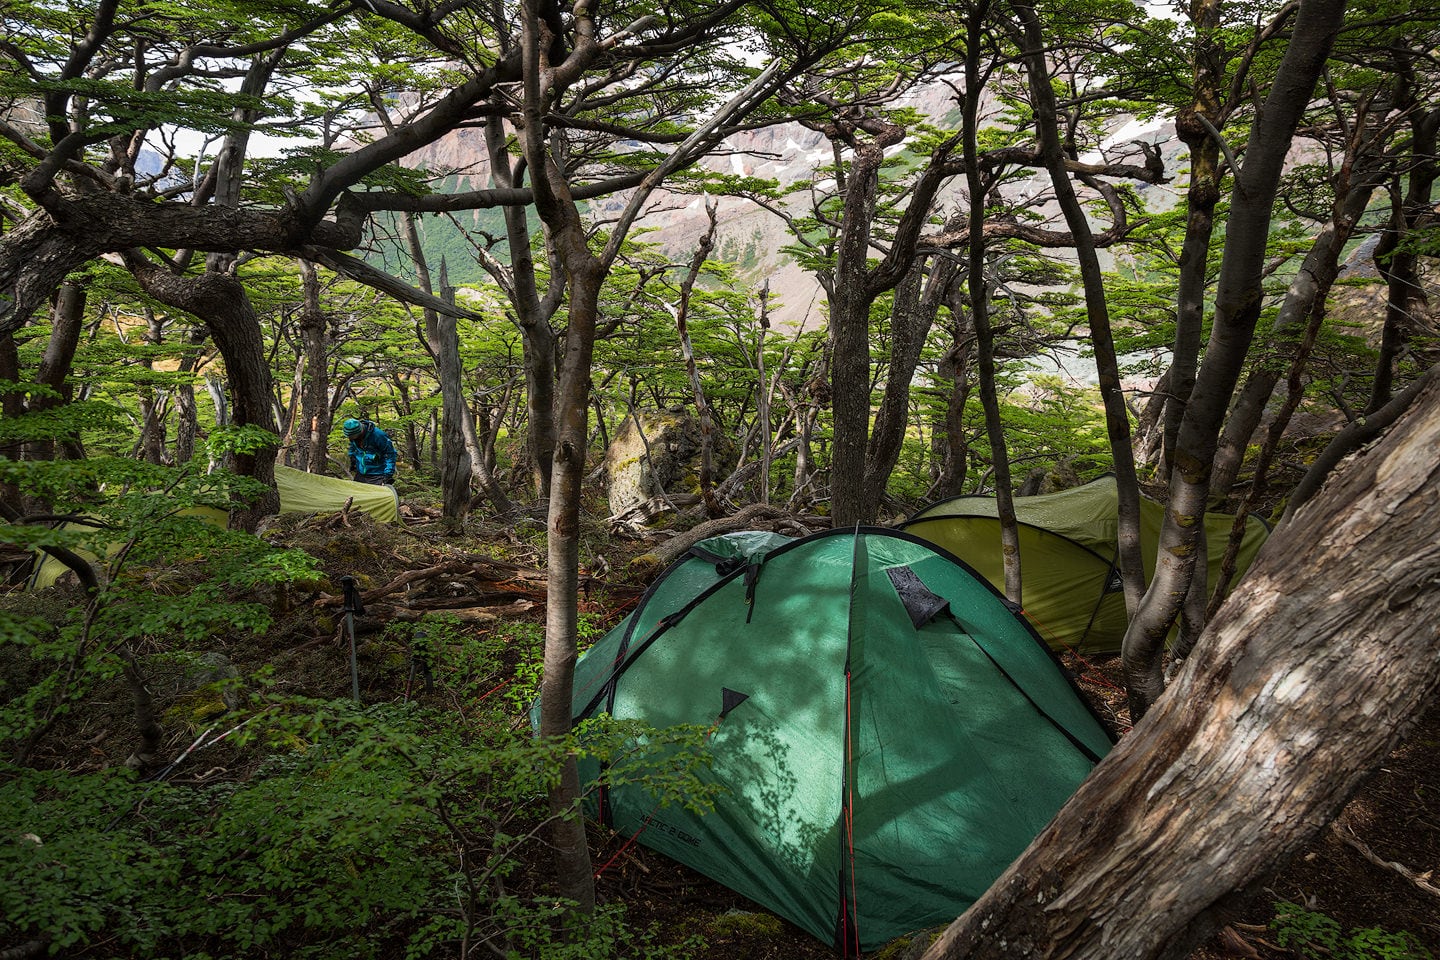 Wet tents in patagonian forest.